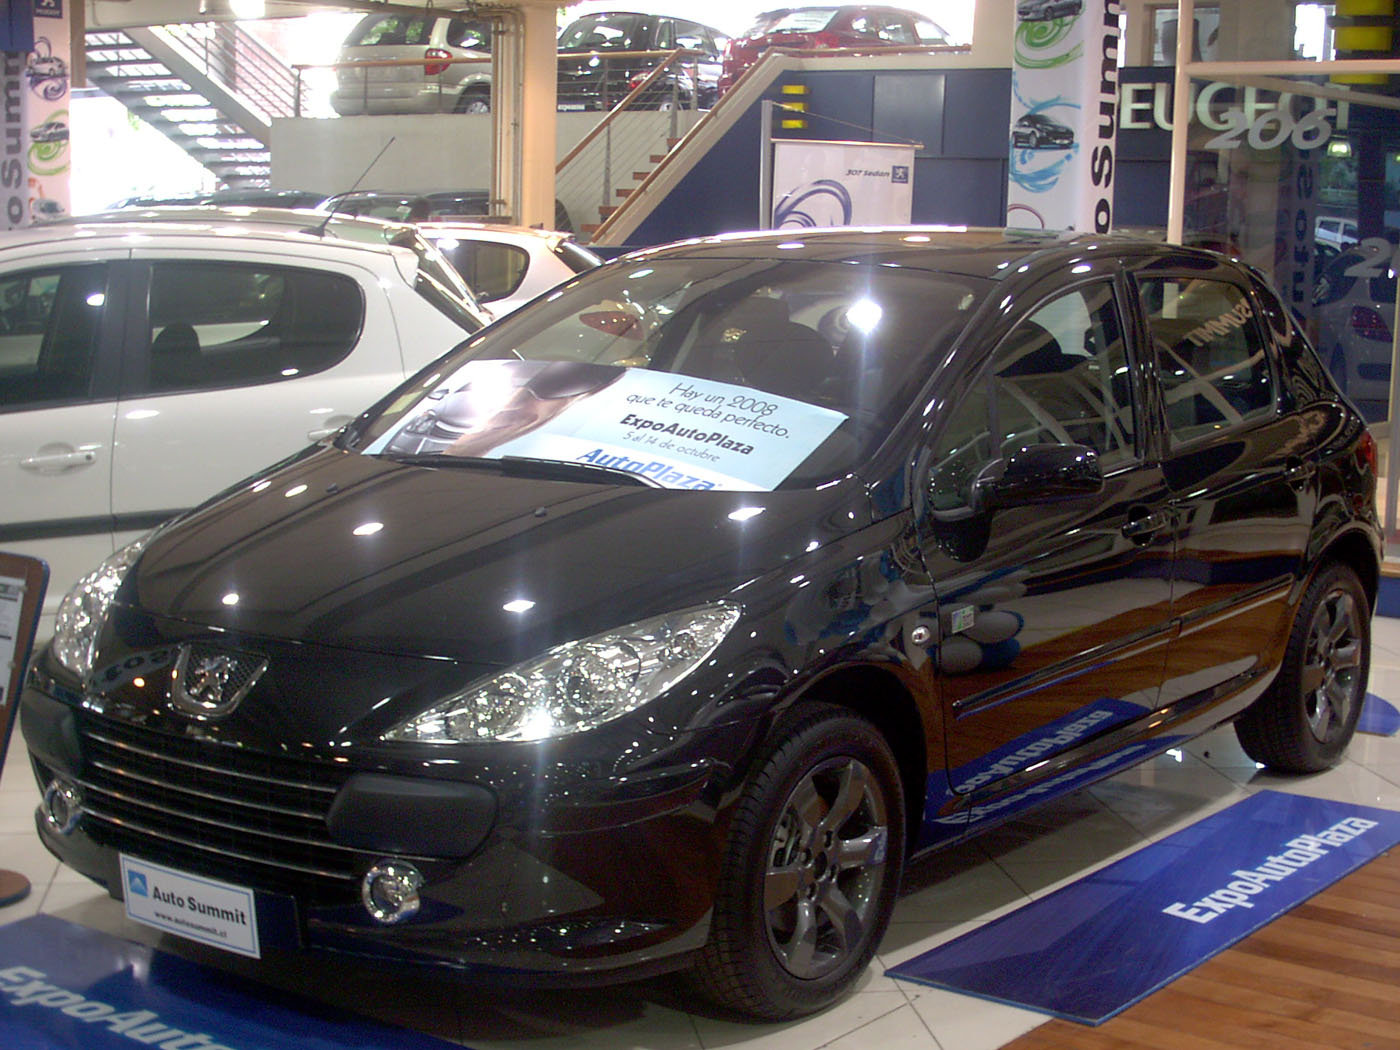 Peugeot 307 iRB Rugby World Cup Edition